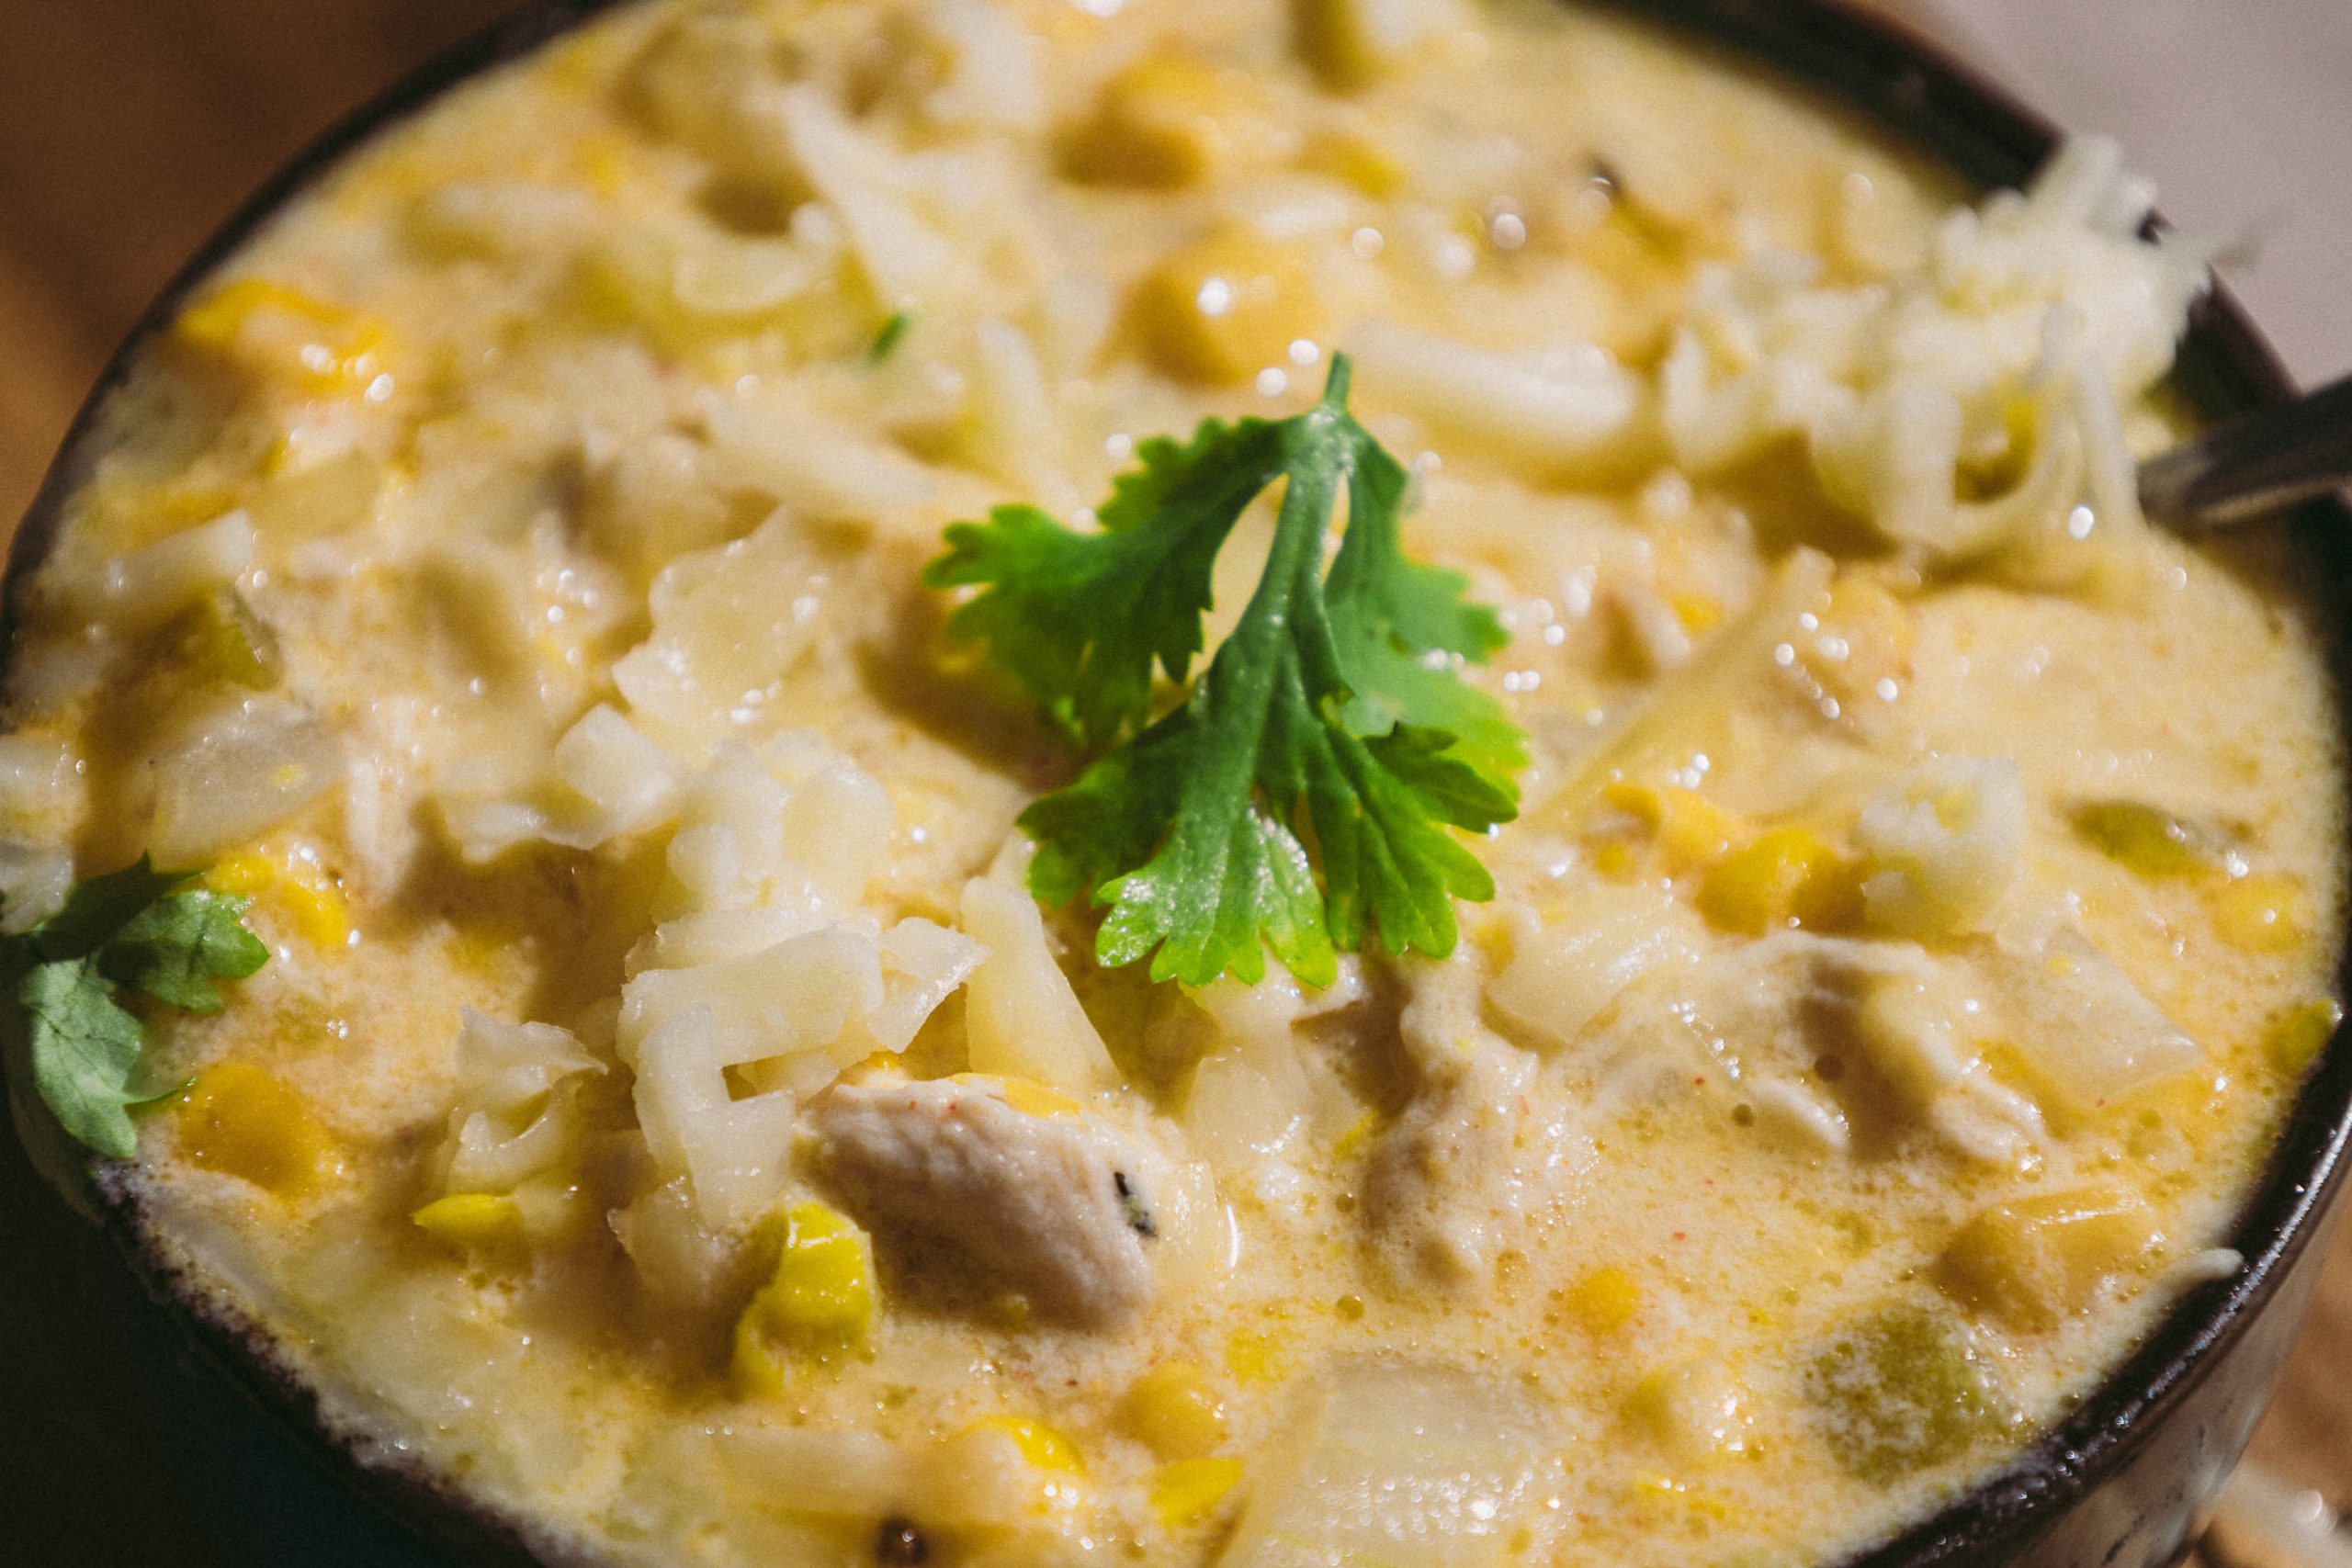 A bowl of Green Chili Chicken Corn Chowderwith a spoon.